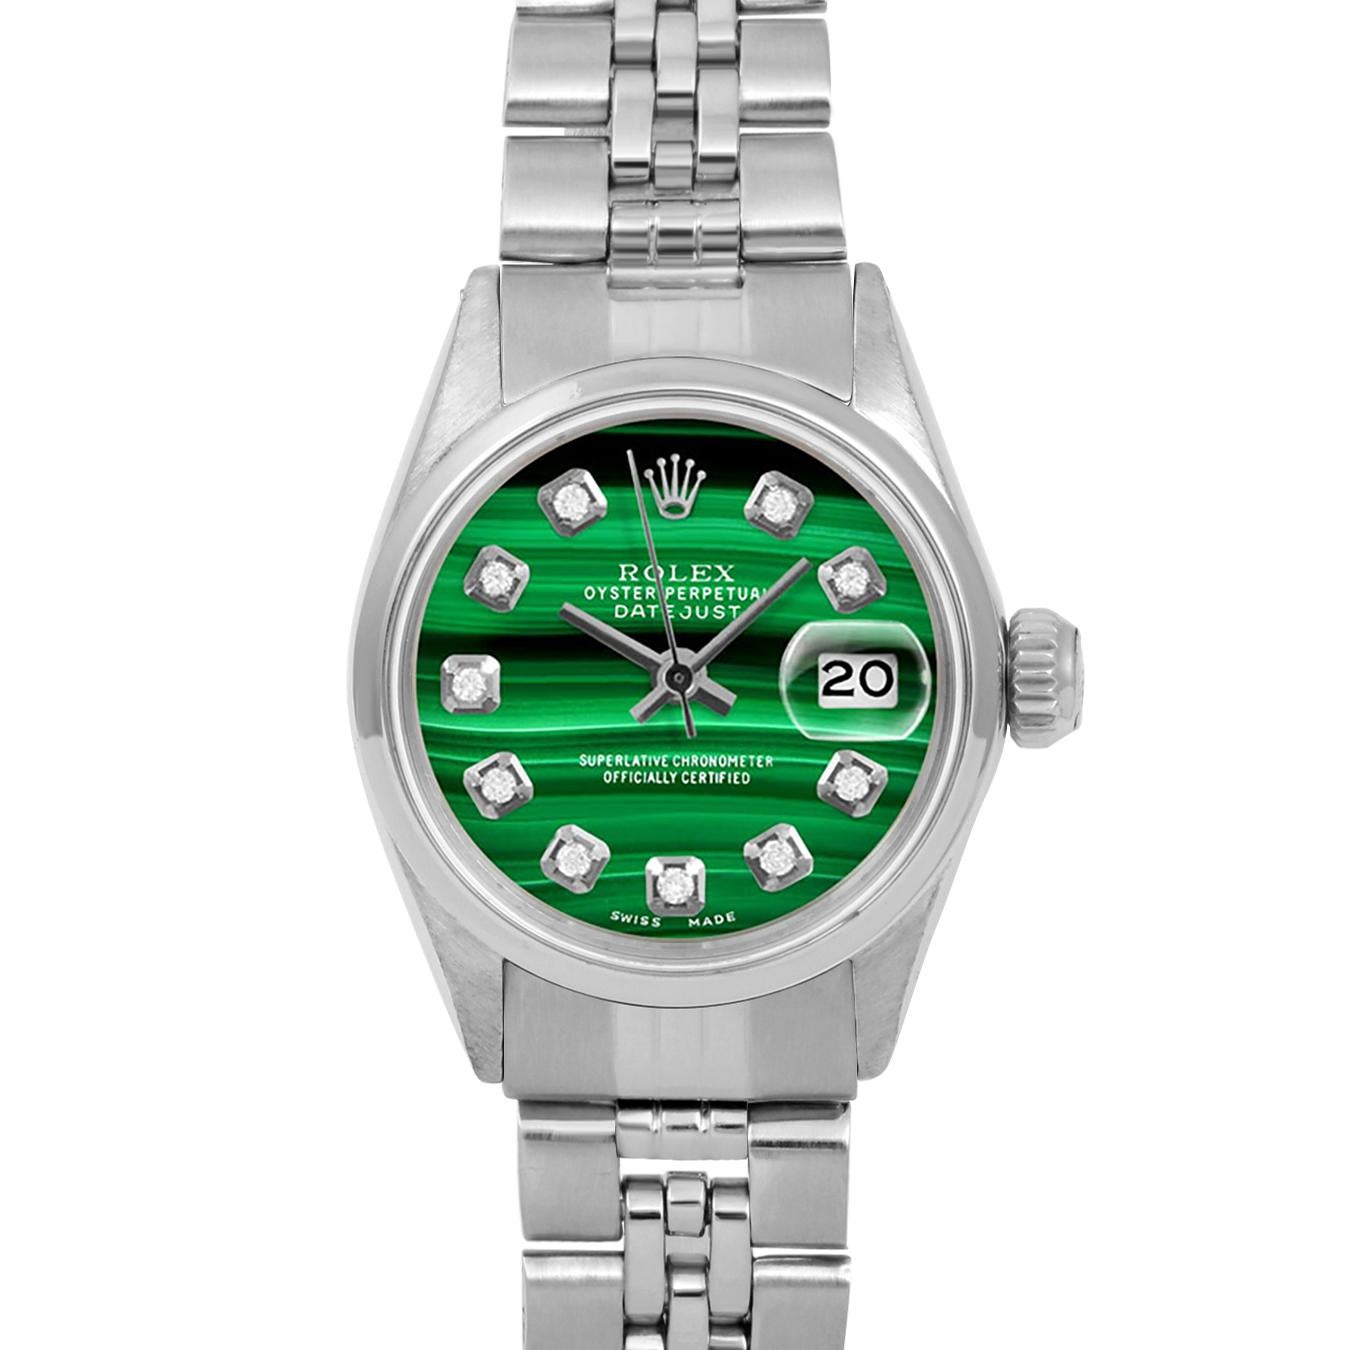 Brand : Rolex
Model : Datejust (Non-Quickset Model)
Gender : Ladies
Metals : Stainless Steel
Case Size : 24 mm

Dial : Custom Malachite Diamond Dial (This dial is not original Rolex And has been added aftermarket yet is a beautiful Custom